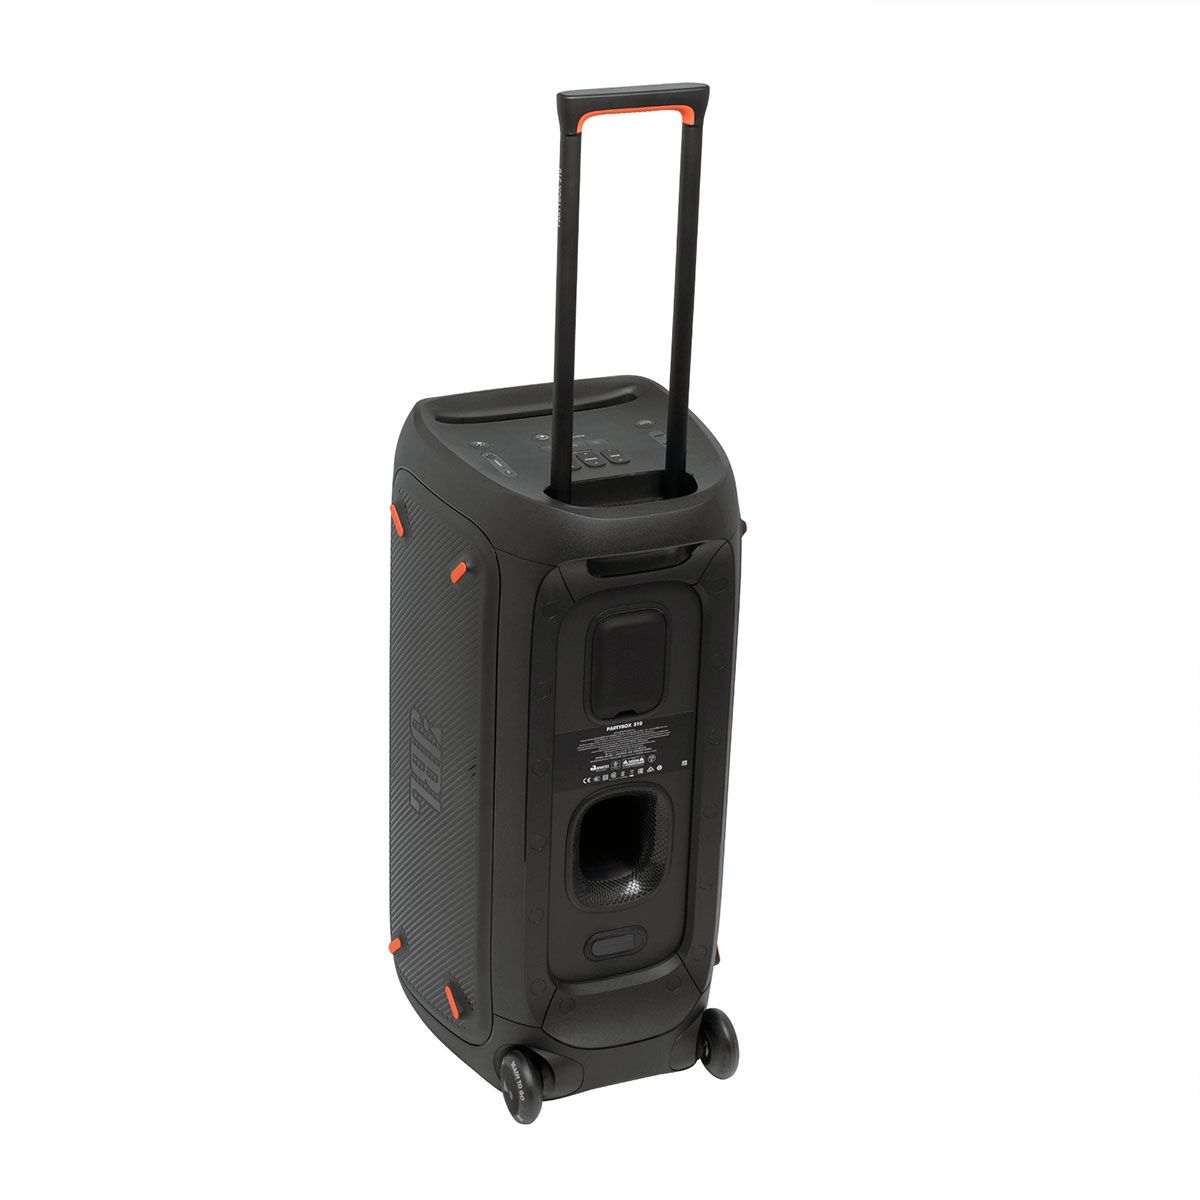 JBL PartyBox 310 angled view with handle extended